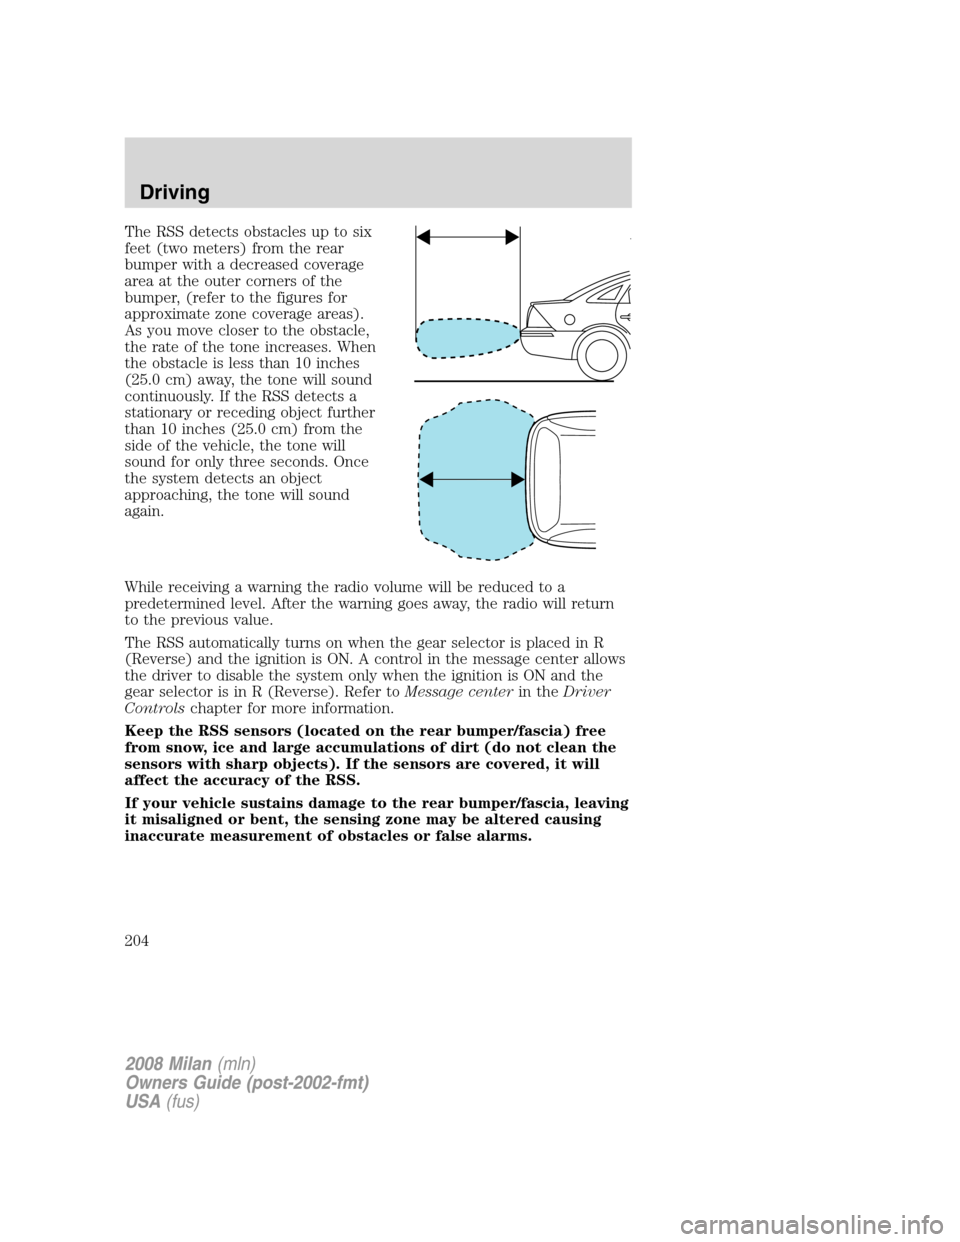 Mercury Milan 2008  s User Guide The RSS detects obstacles up to six
feet (two meters) from the rear
bumper with a decreased coverage
area at the outer corners of the
bumper, (refer to the figures for
approximate zone coverage areas)